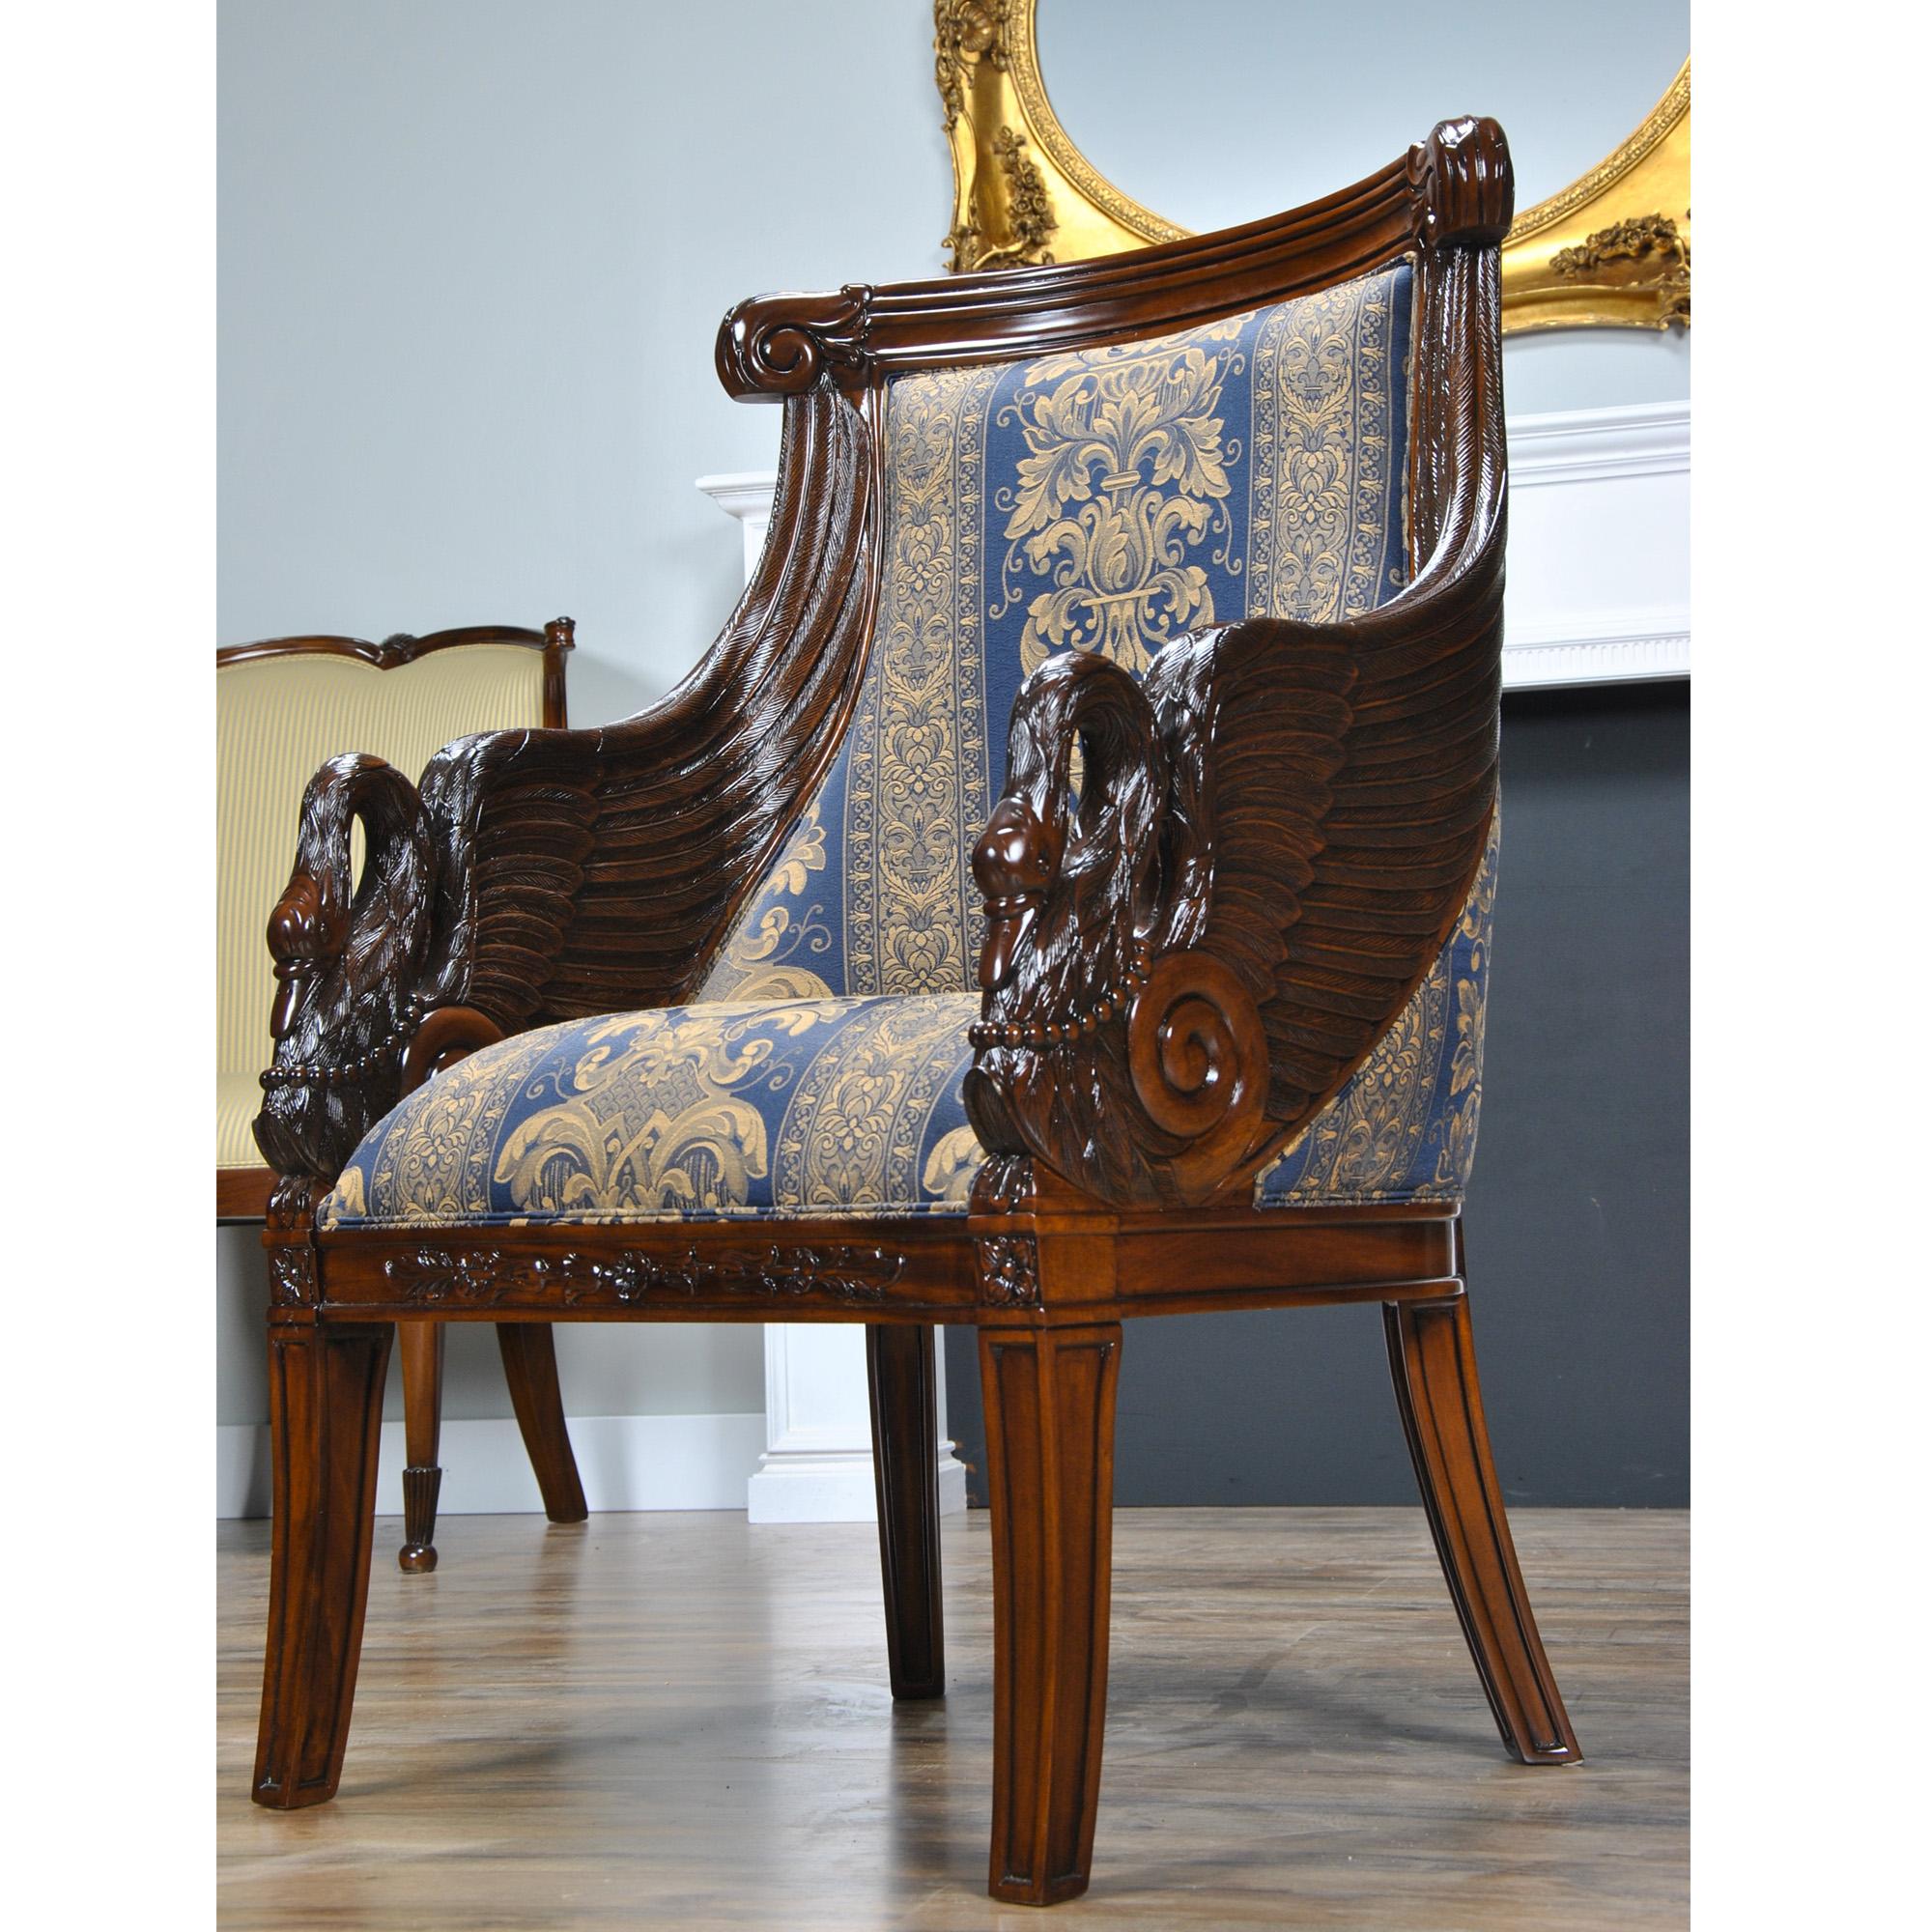 This high end Mahogany Swan Arm Chair  from Niagara Furniture with it’s impressive solid mahogany hand carved details could be the focal point of any setting. A great look with a solid and comfortable frame. Inspired by an antique chair from the